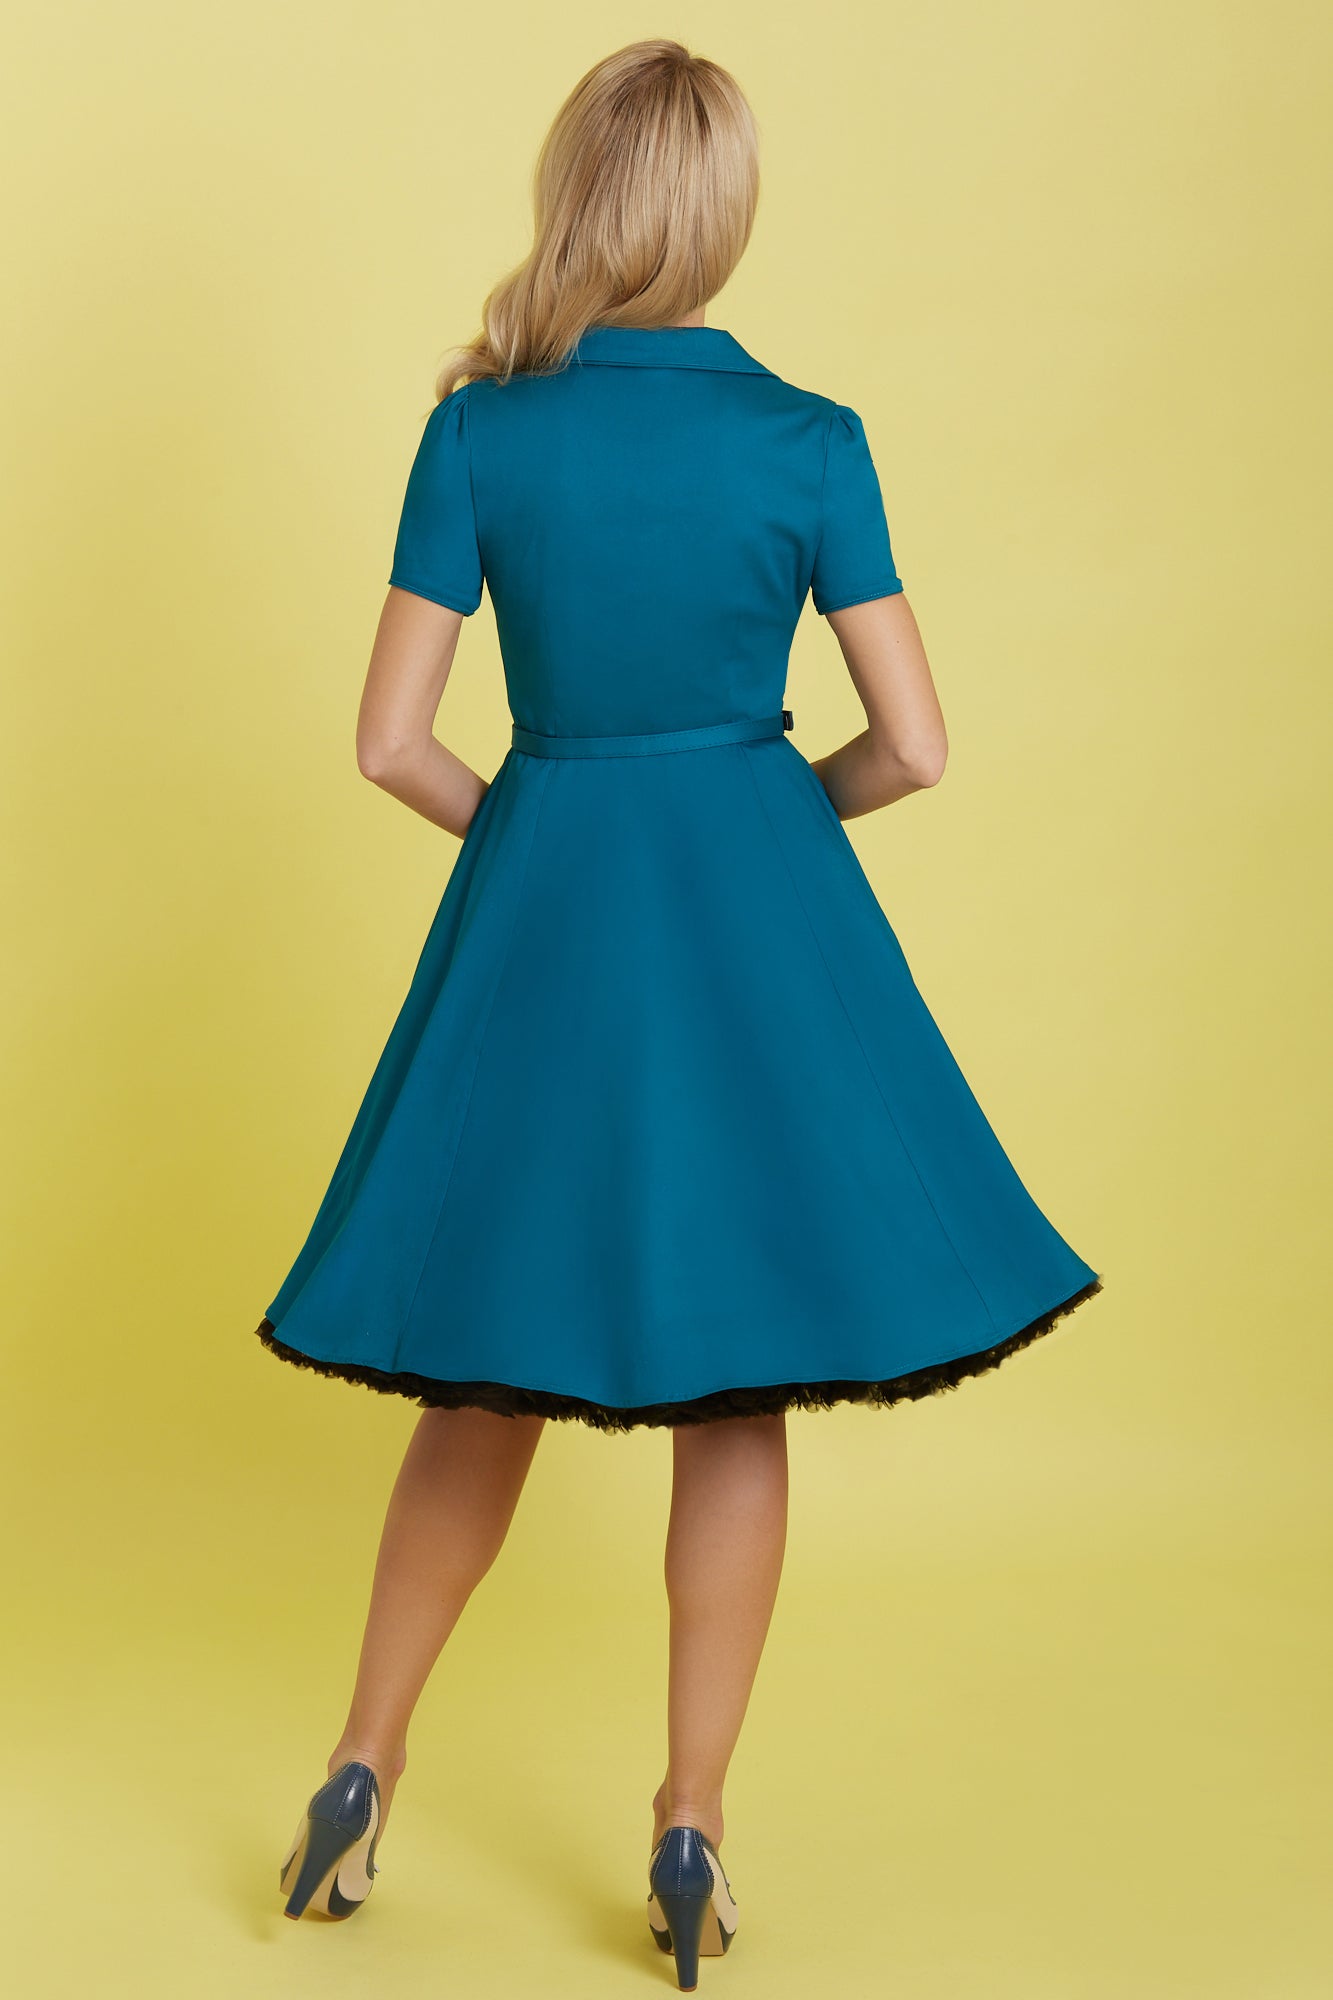 Model wearing our short sleeved Penelope button top dress in teal blue, with petticoat, back view